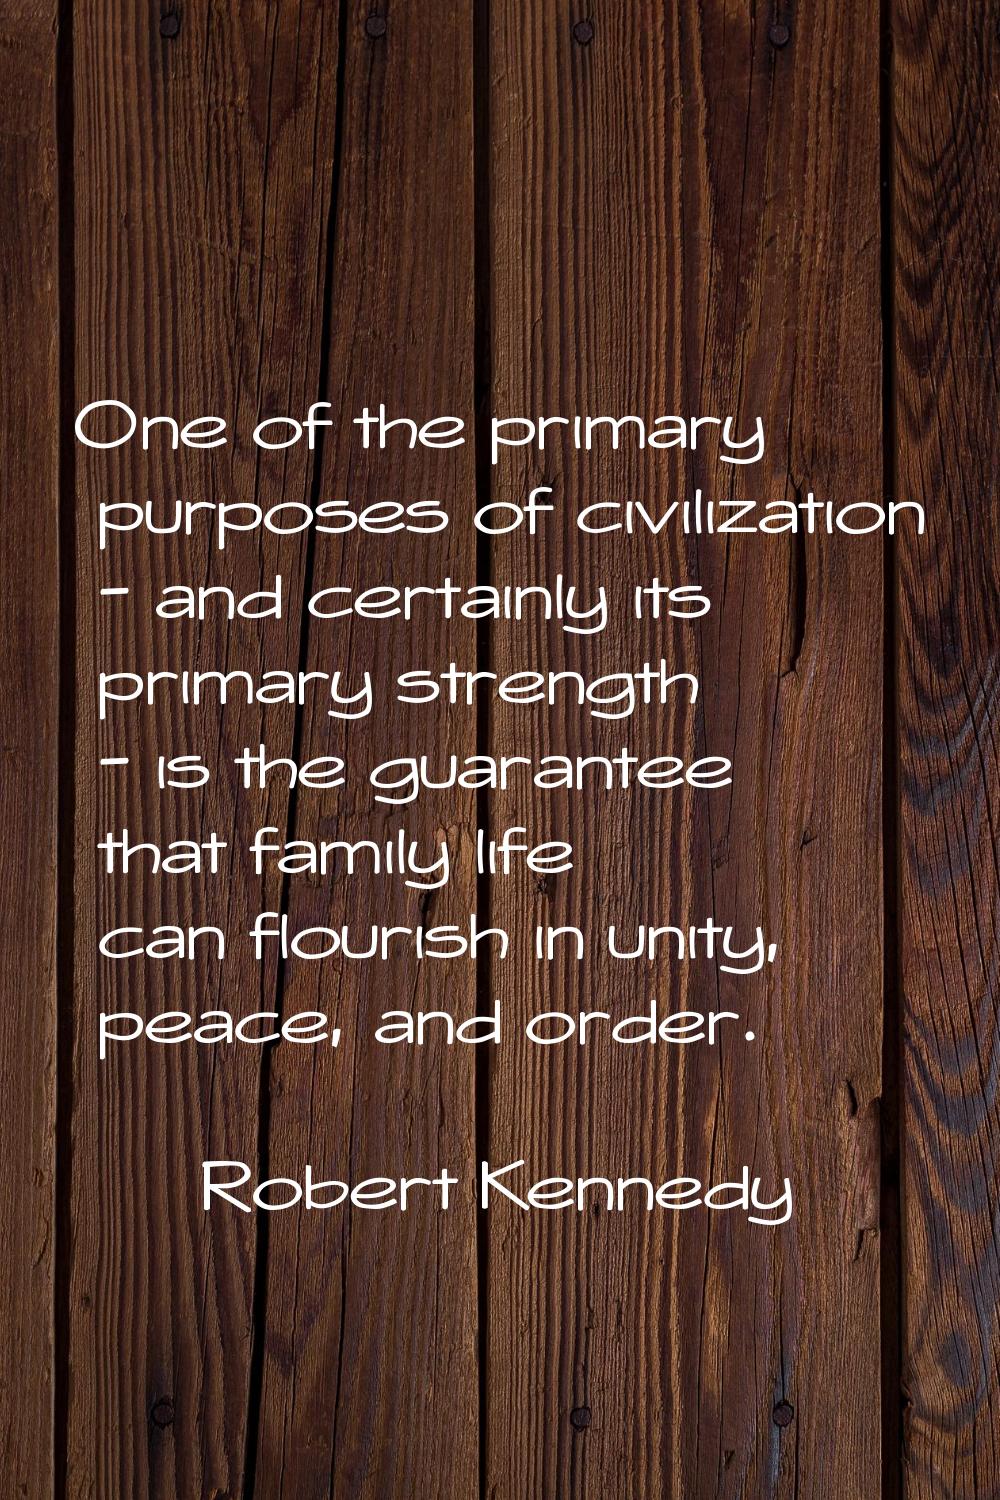 One of the primary purposes of civilization - and certainly its primary strength - is the guarantee